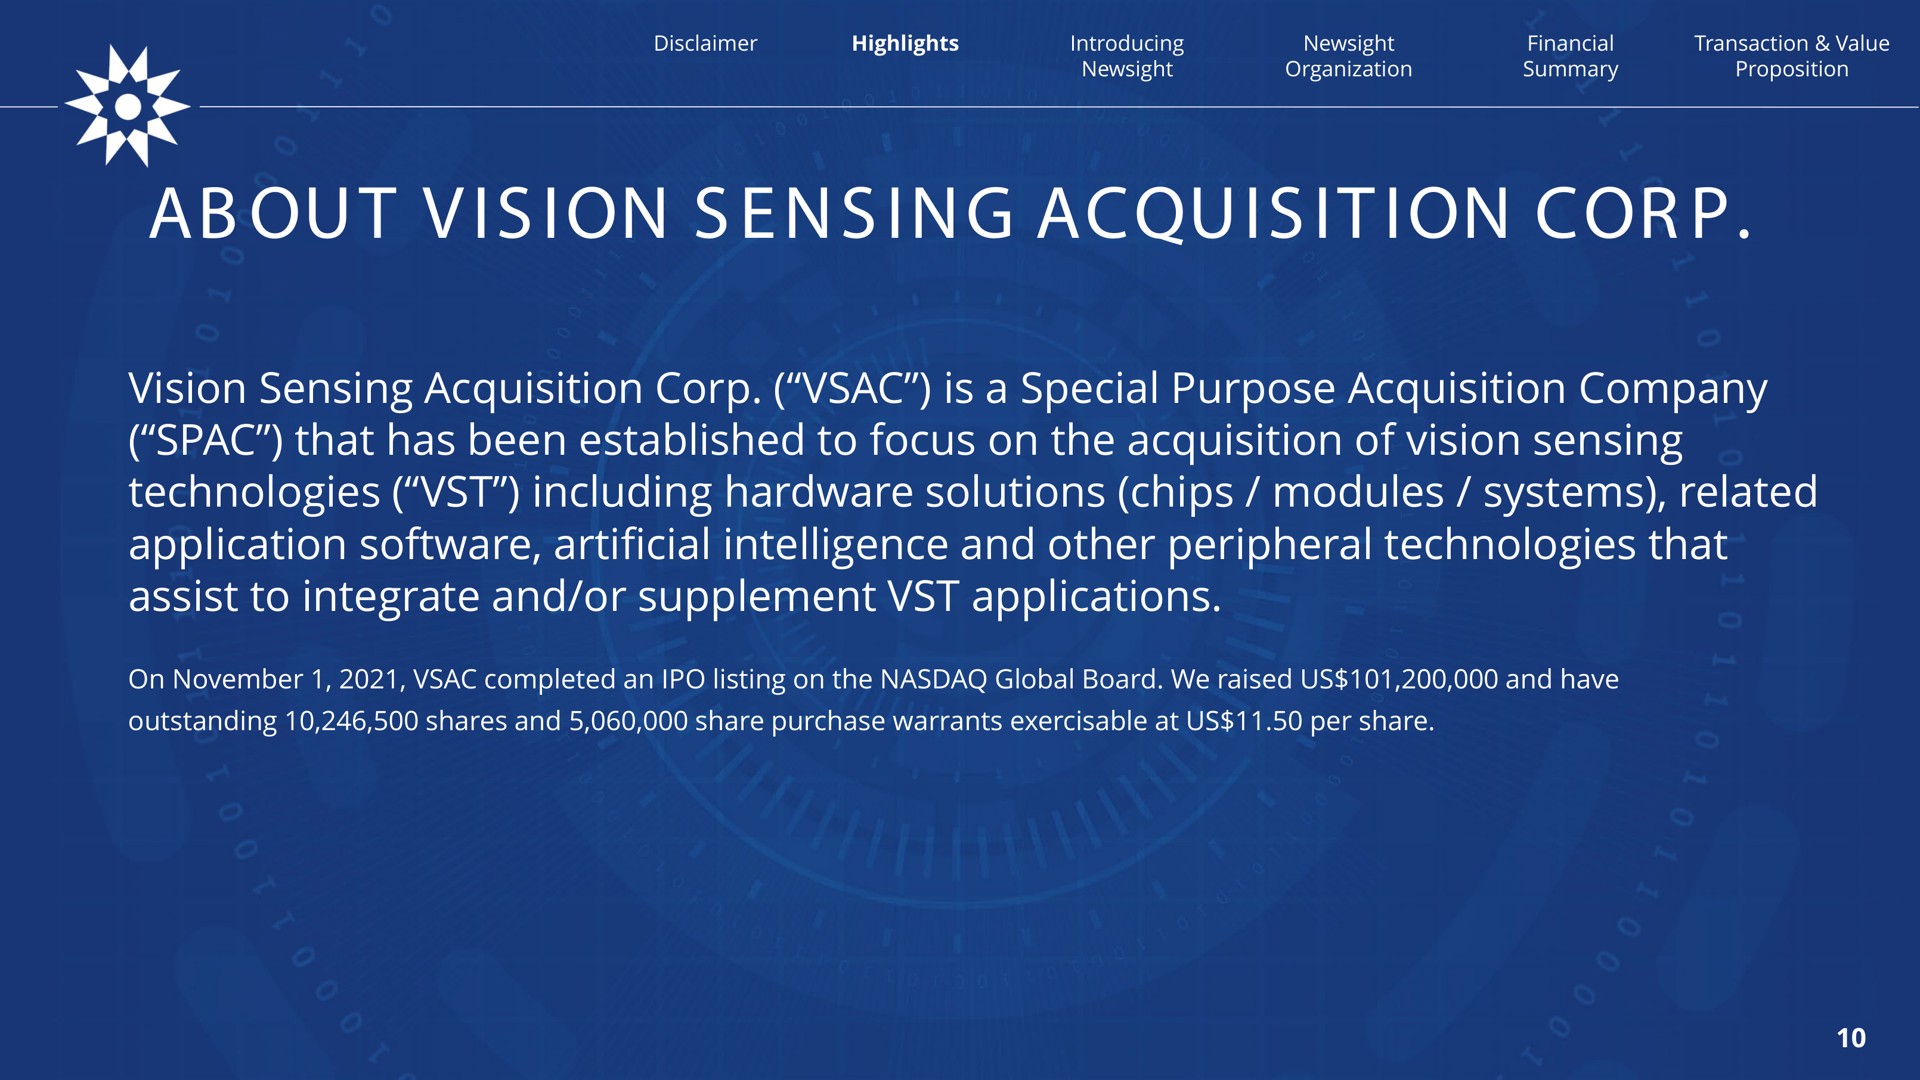 out is ion ing it ion cor vision sensing acquisition corp is a special purpose acquisition company that has been established to focus on the acquisition of vision sensing technologies including hardware solutions chips modules systems related application artificial intelligence and other peripheral technologies that assist to integrate and or supplement applications on completed an listing on the global board we raised us and have outstanding shares and share purchase warrants exercisable at us per share about | Newsight Imaging